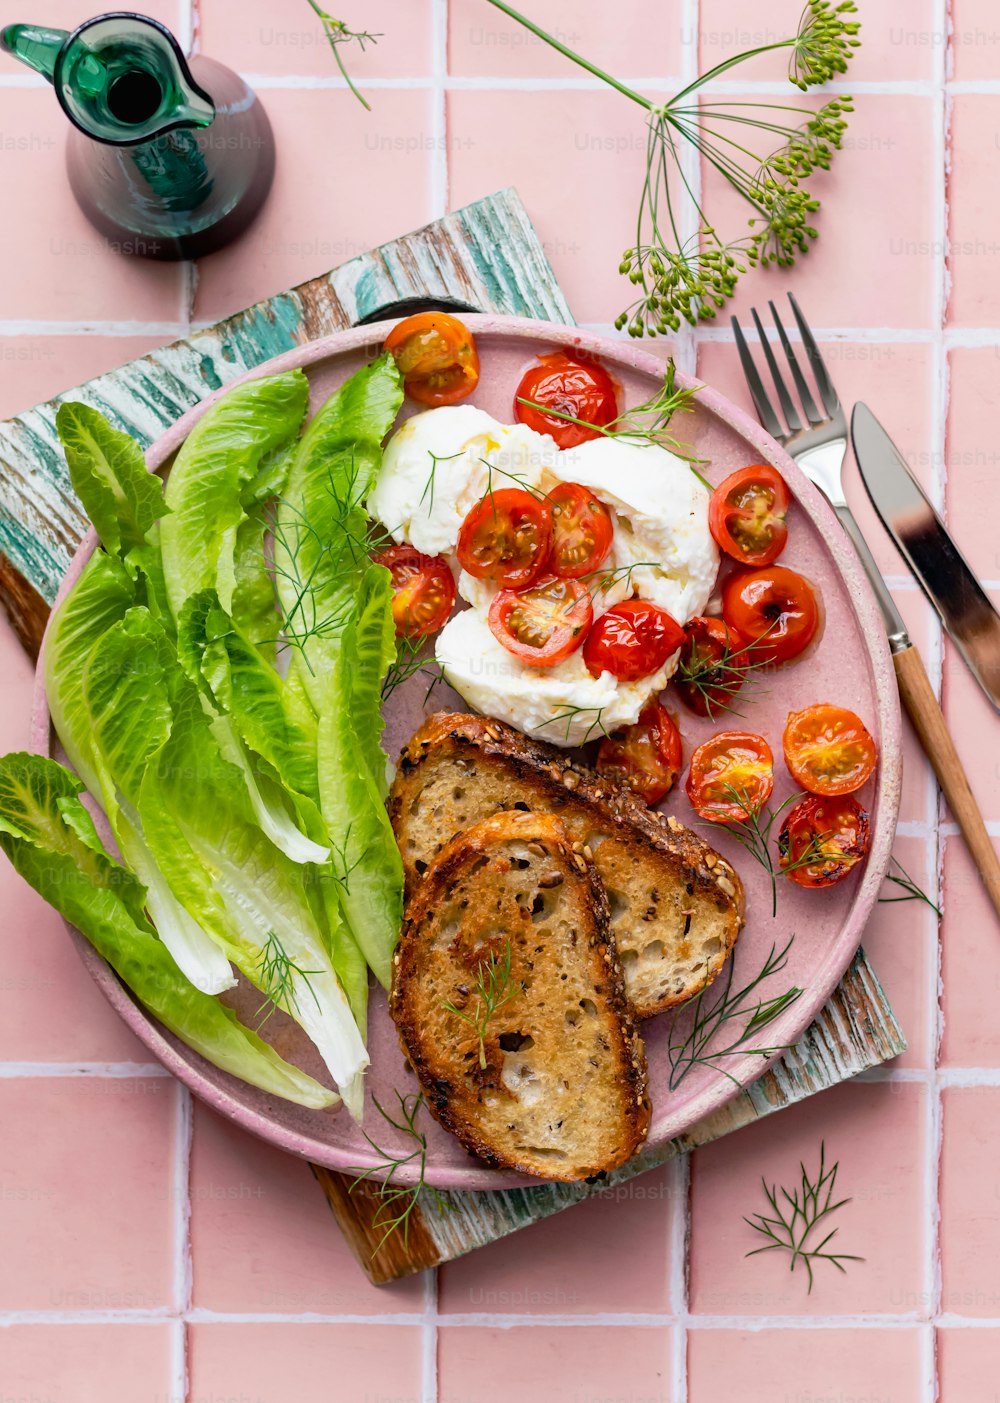 a plate of food with bread, lettuce, tomatoes and eggs